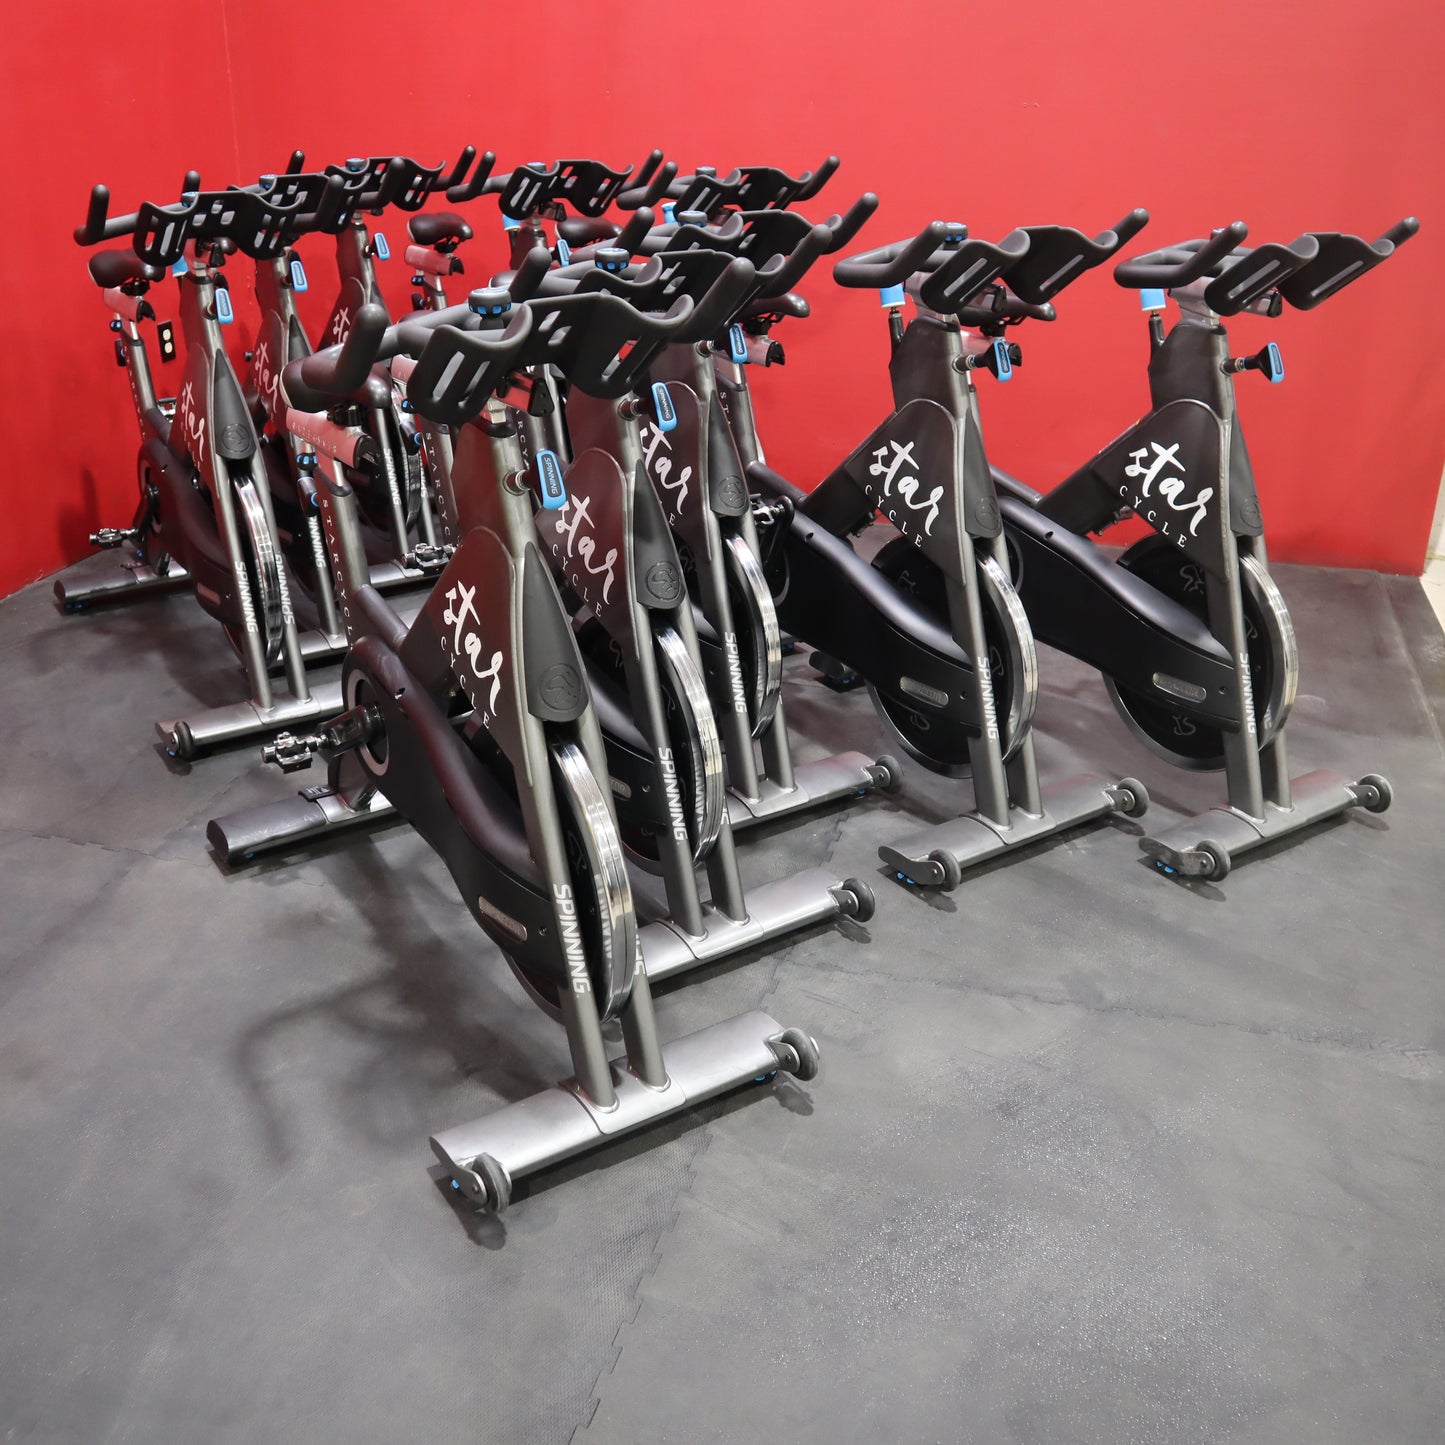 Precor SBK Indoor Cycle Package of 10 (Refurbished)